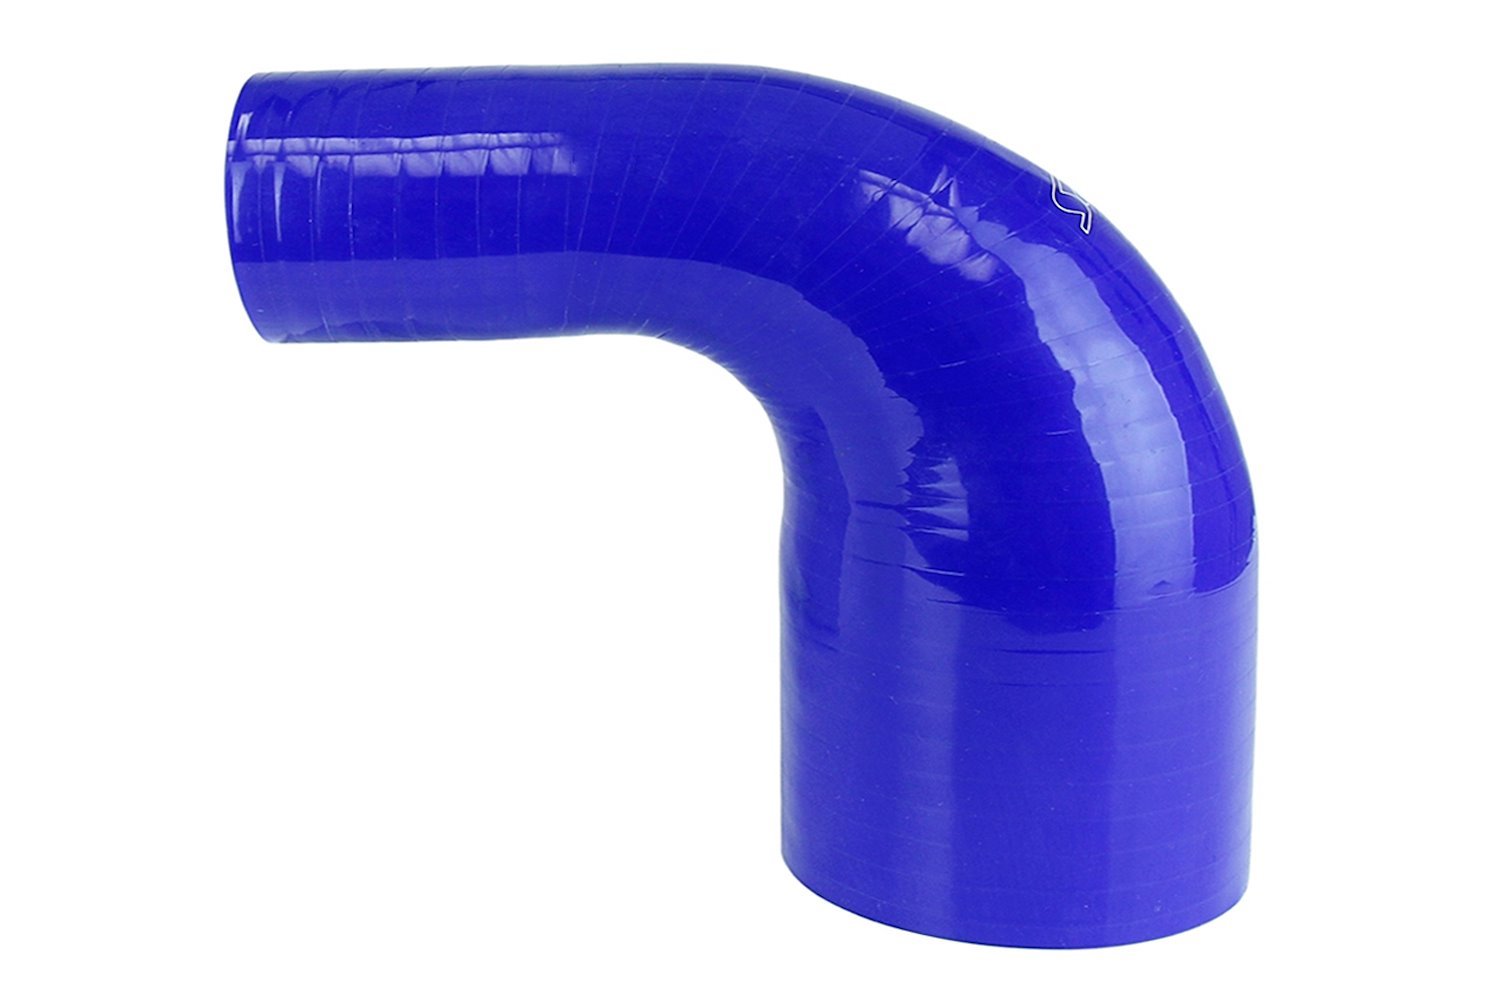 HTSER90-300-450-BLUE Silicone 90-Degree Elbow Hose, High-Temp 4-Ply Reinforced, 3 in. - 4-1/2 in. ID, Blue